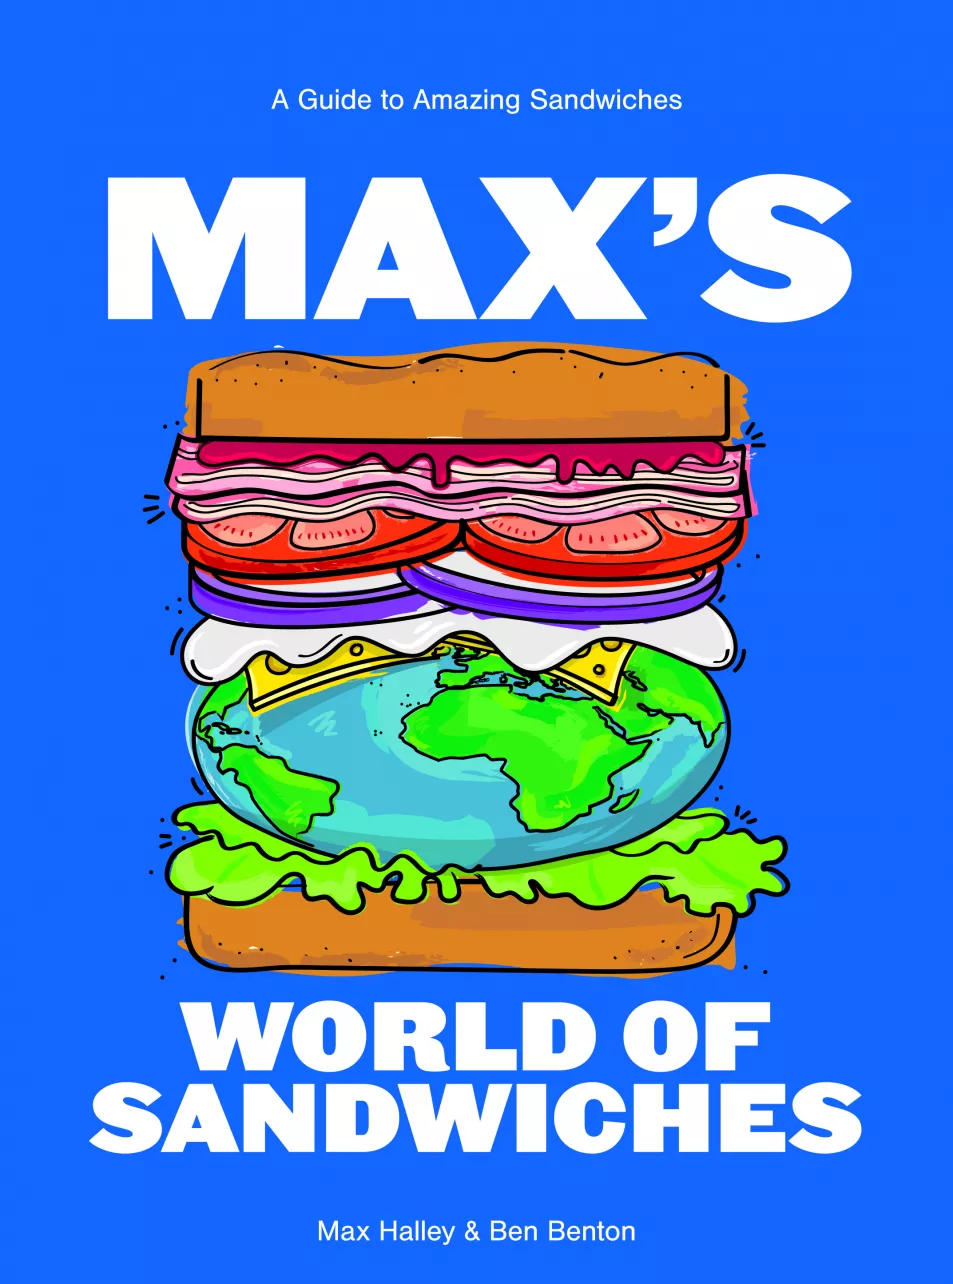 Max’s World Of Sandwiches by Max Halley and Benjamin Benton